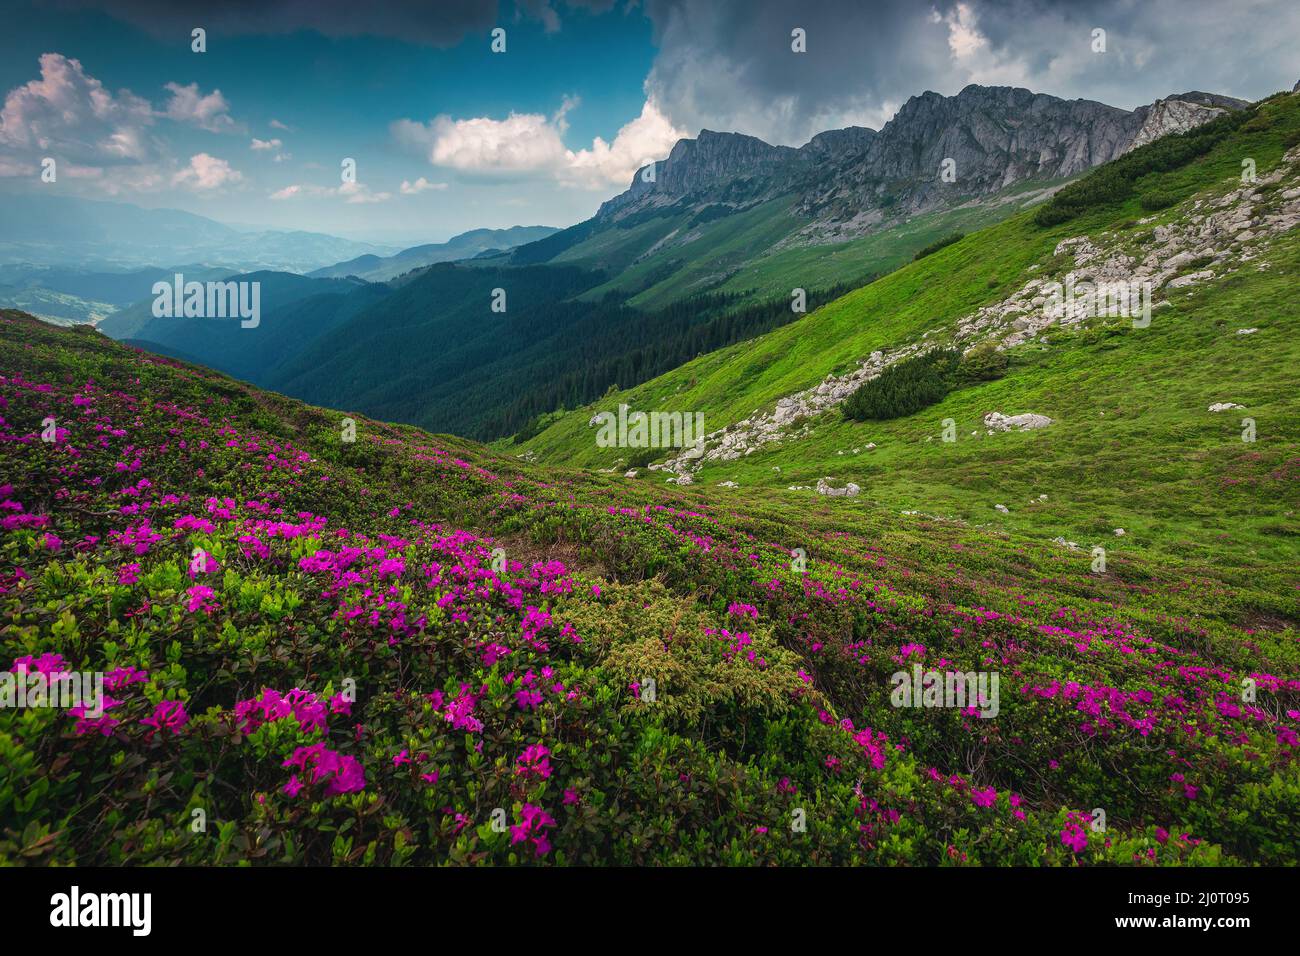 Majestic summer scenery, blooming colorful pink rhododendron mountain flowers on the hill, Bucegi mountains, Carpathians, Transylvania, Romania, Europ Stock Photo